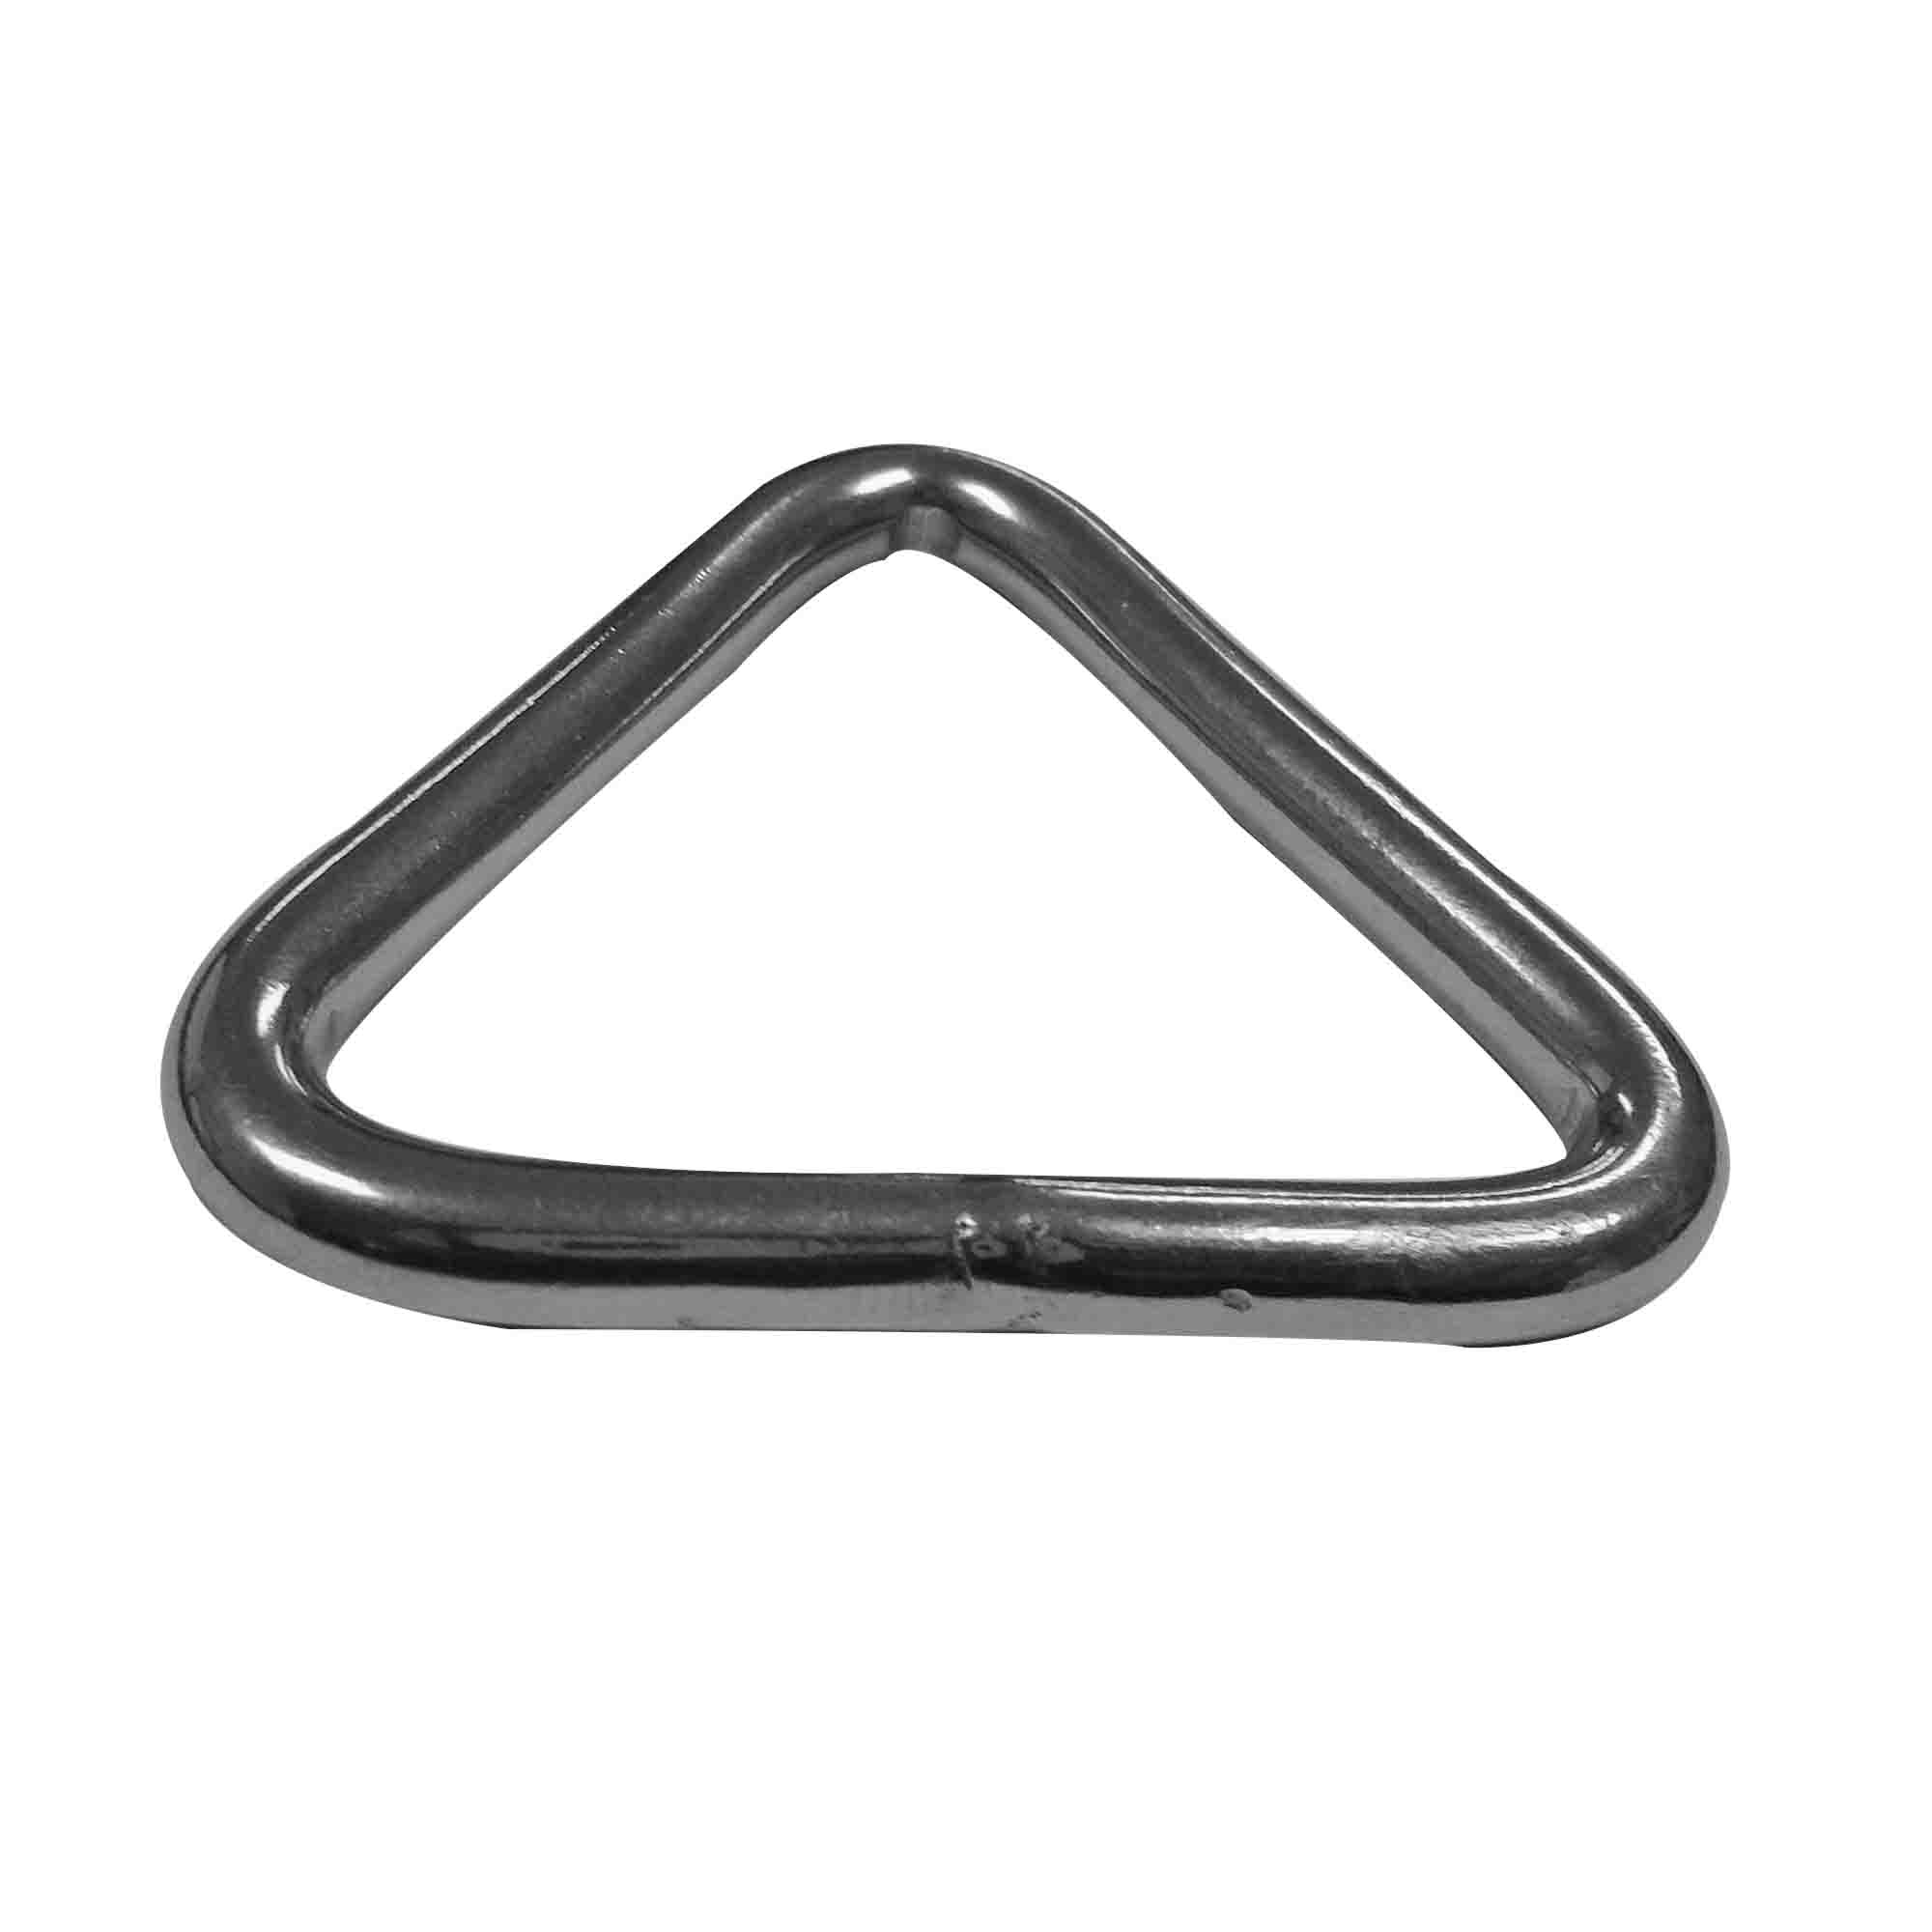 Stainless Steel Triangle, 1/4" x 2" - FO3808